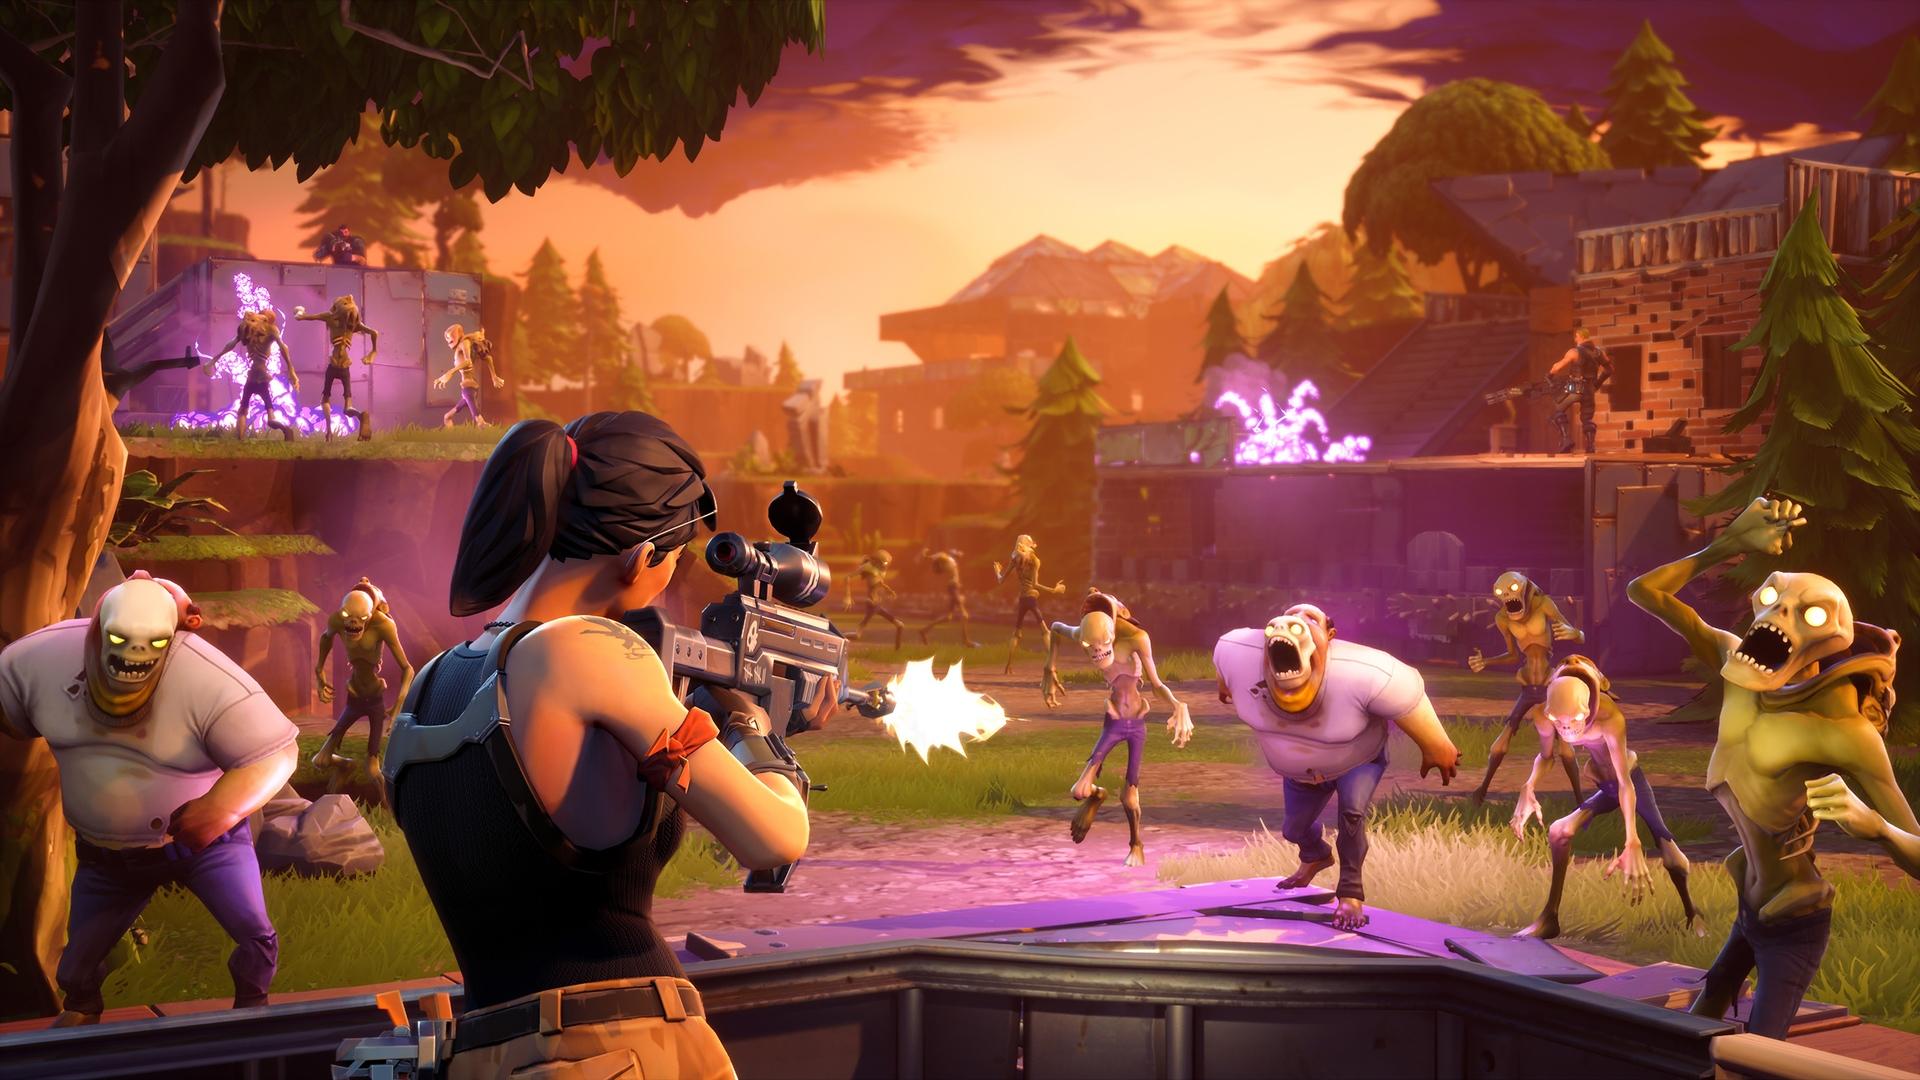 Free download Fortnite HD Wallpaper and Background Image